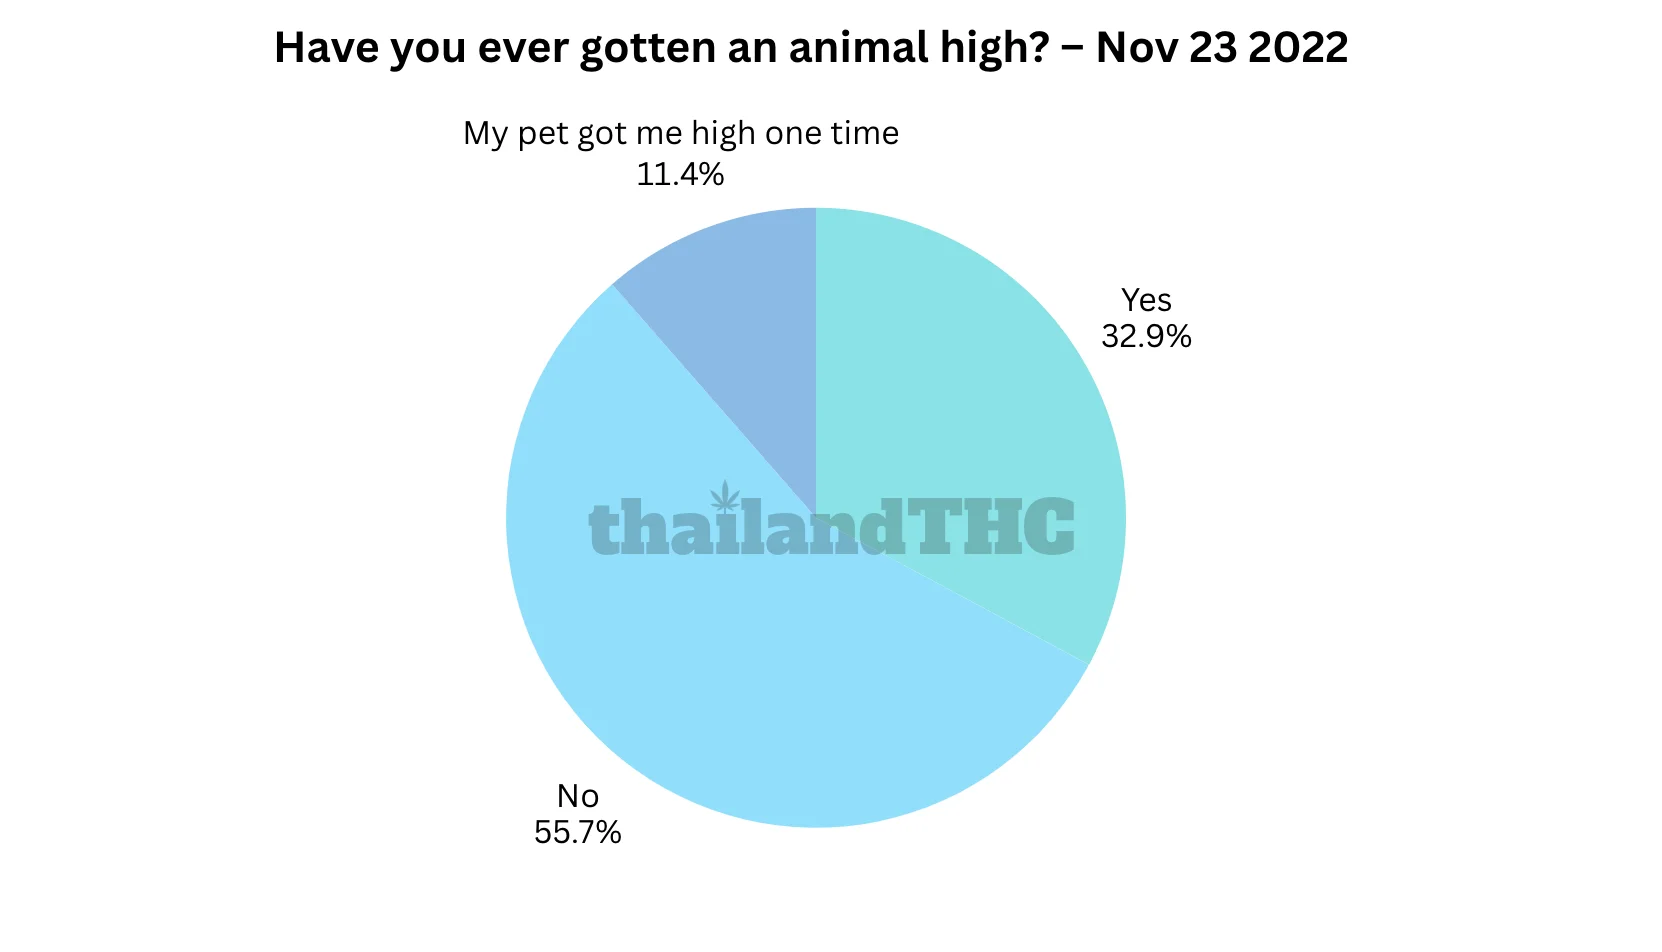 Have you ever gotten an animal high?